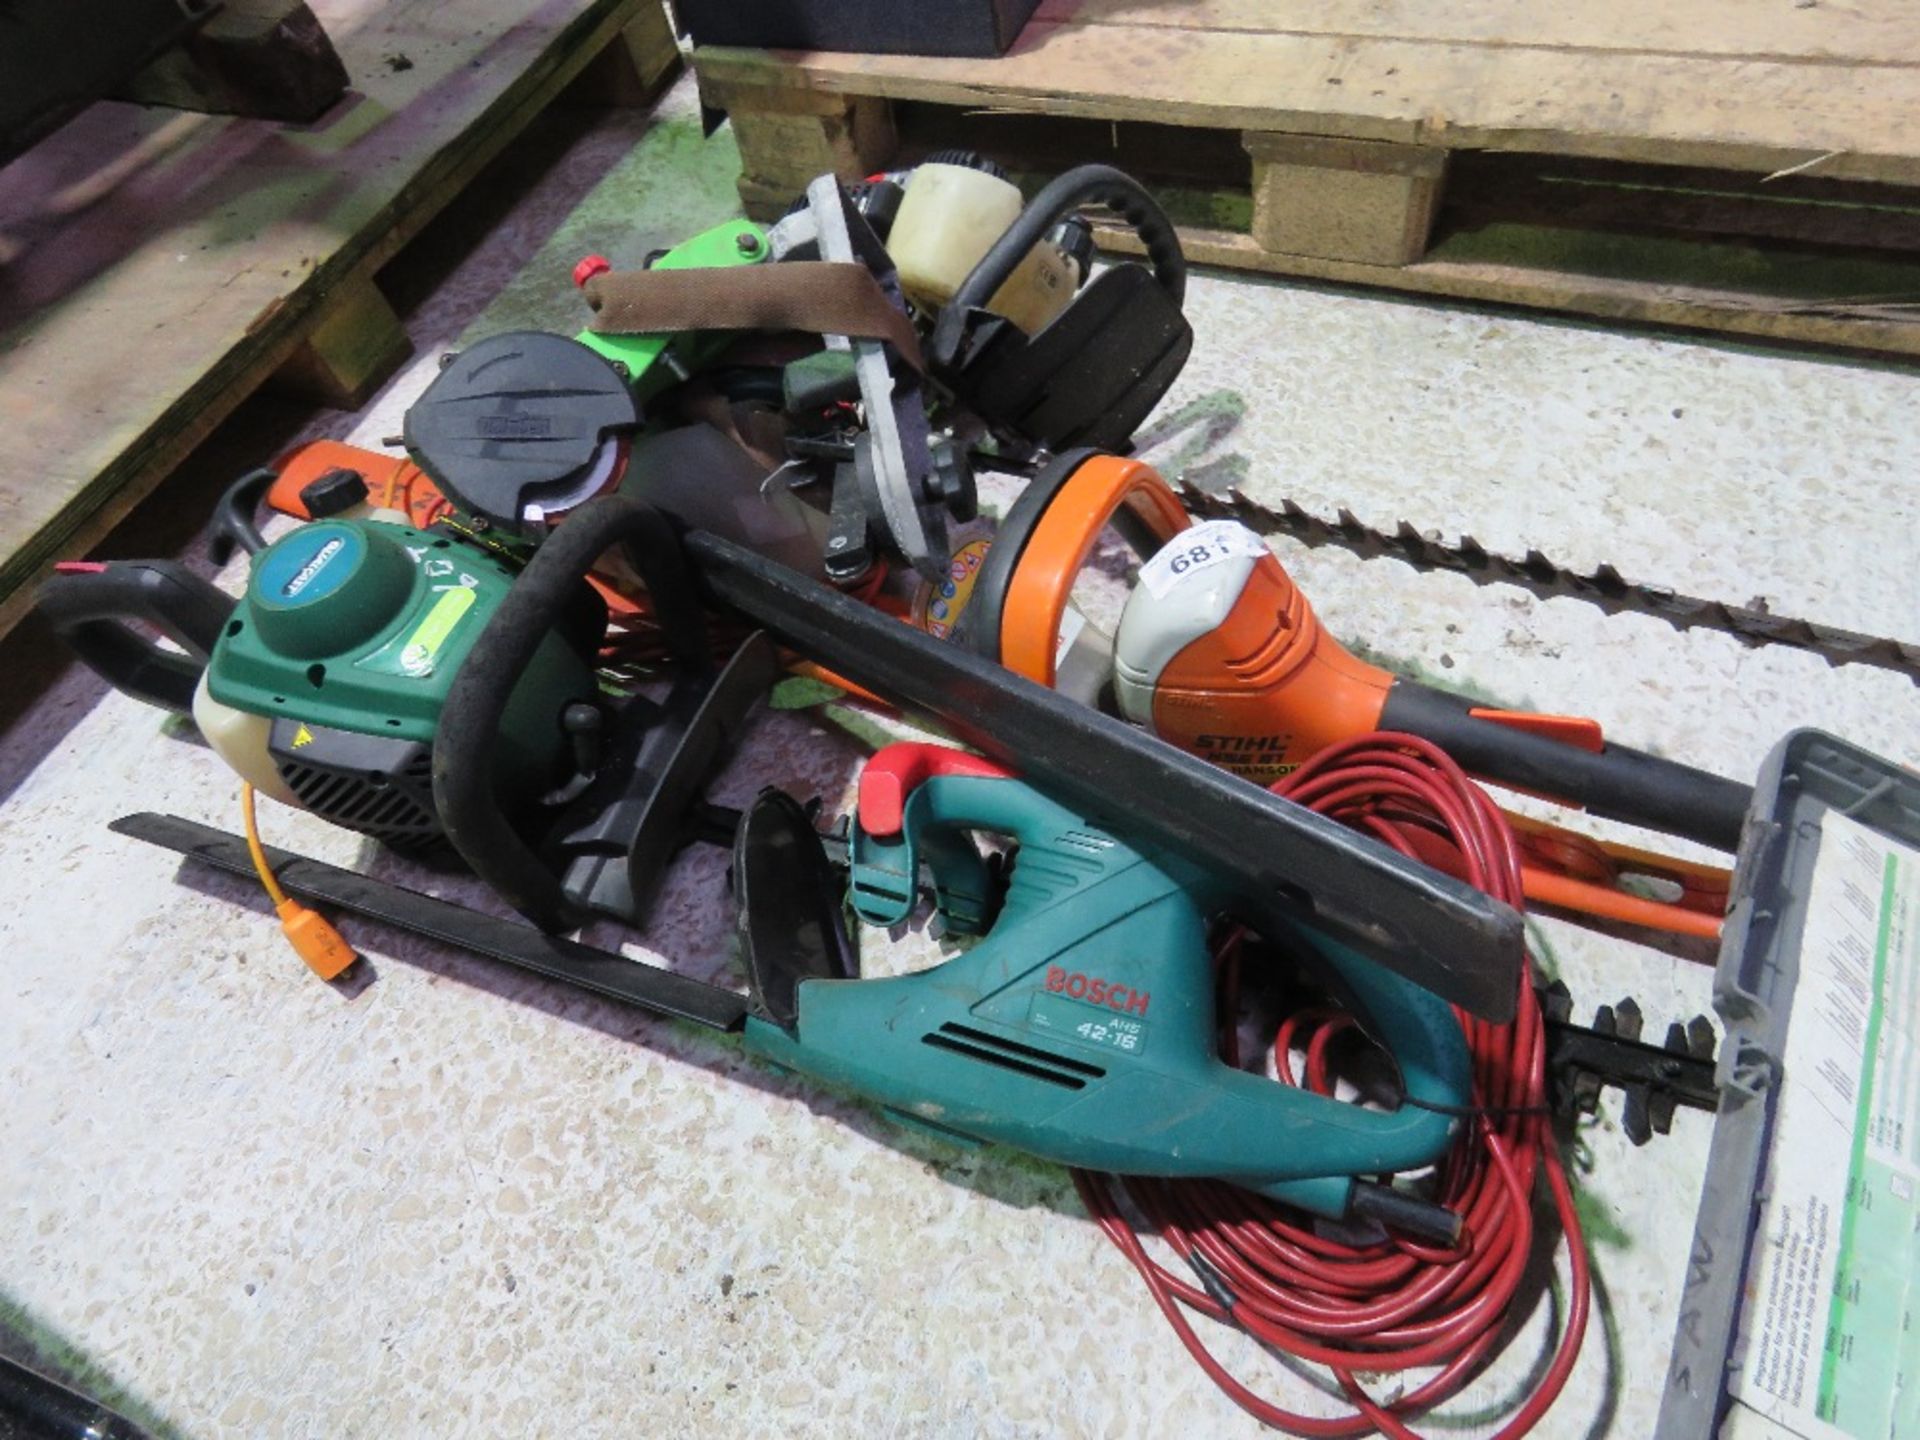 2 X PETROL HEDGE CUTTERS PLUS 2 X ELECTRIC HEDGE CUTTERS AND A CHAINSAW SHARPENER. - Image 2 of 14